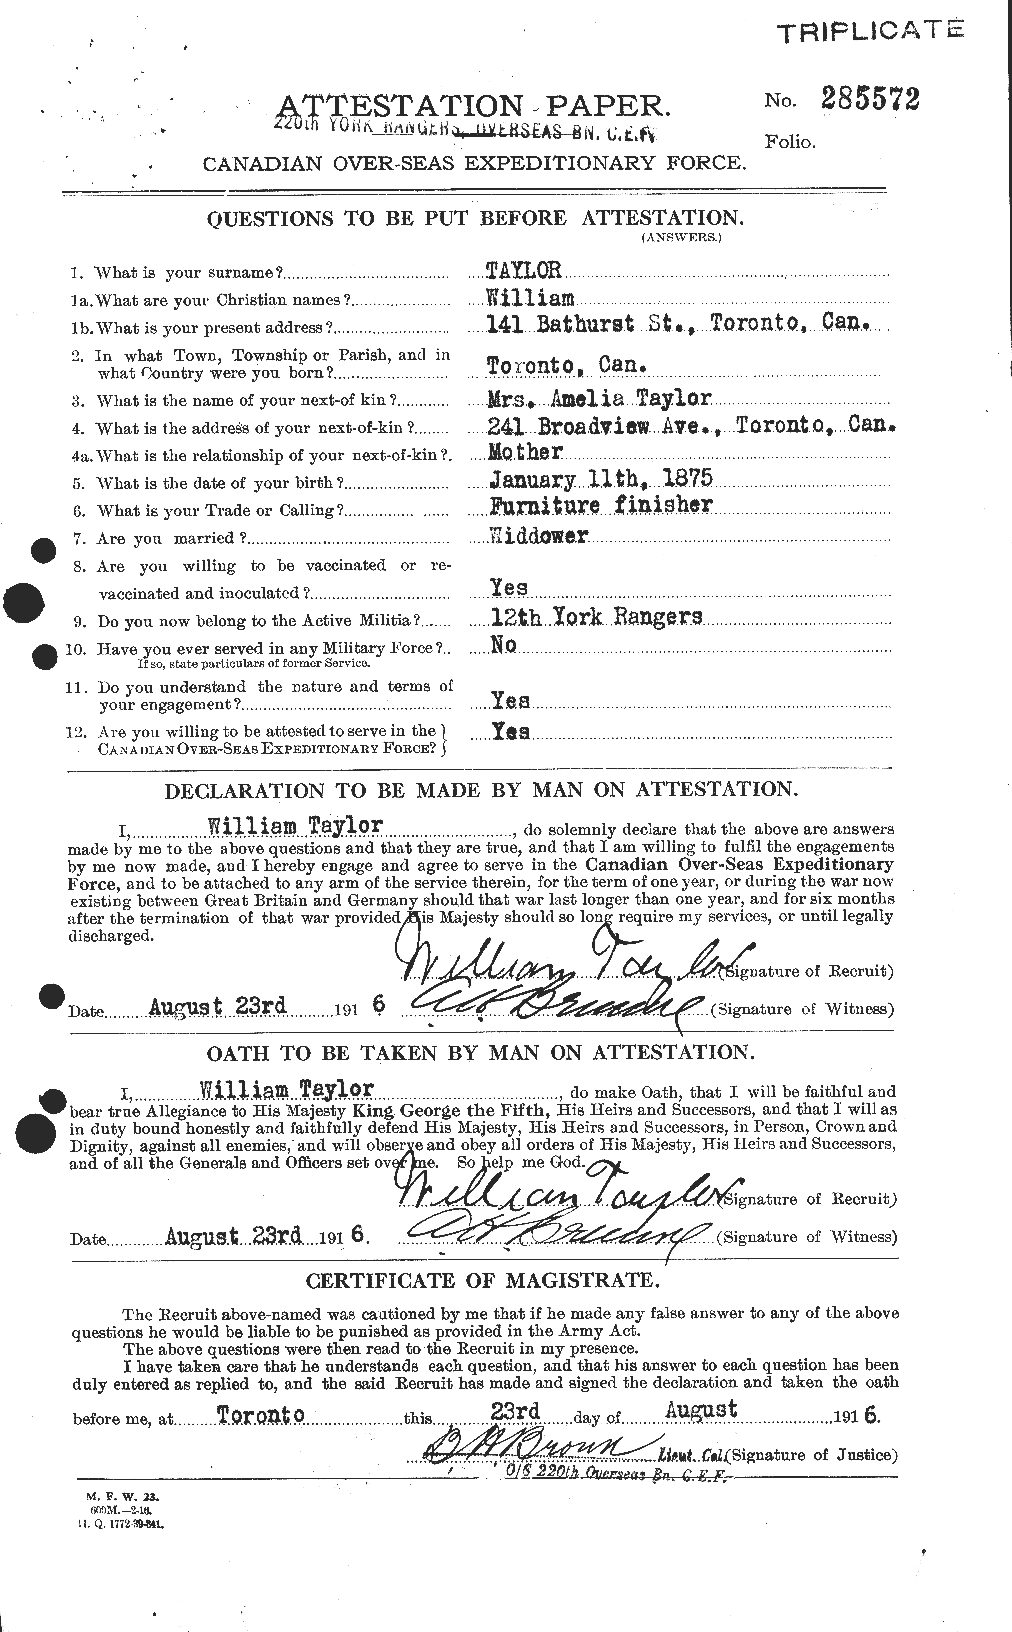 Personnel Records of the First World War - CEF 628123a